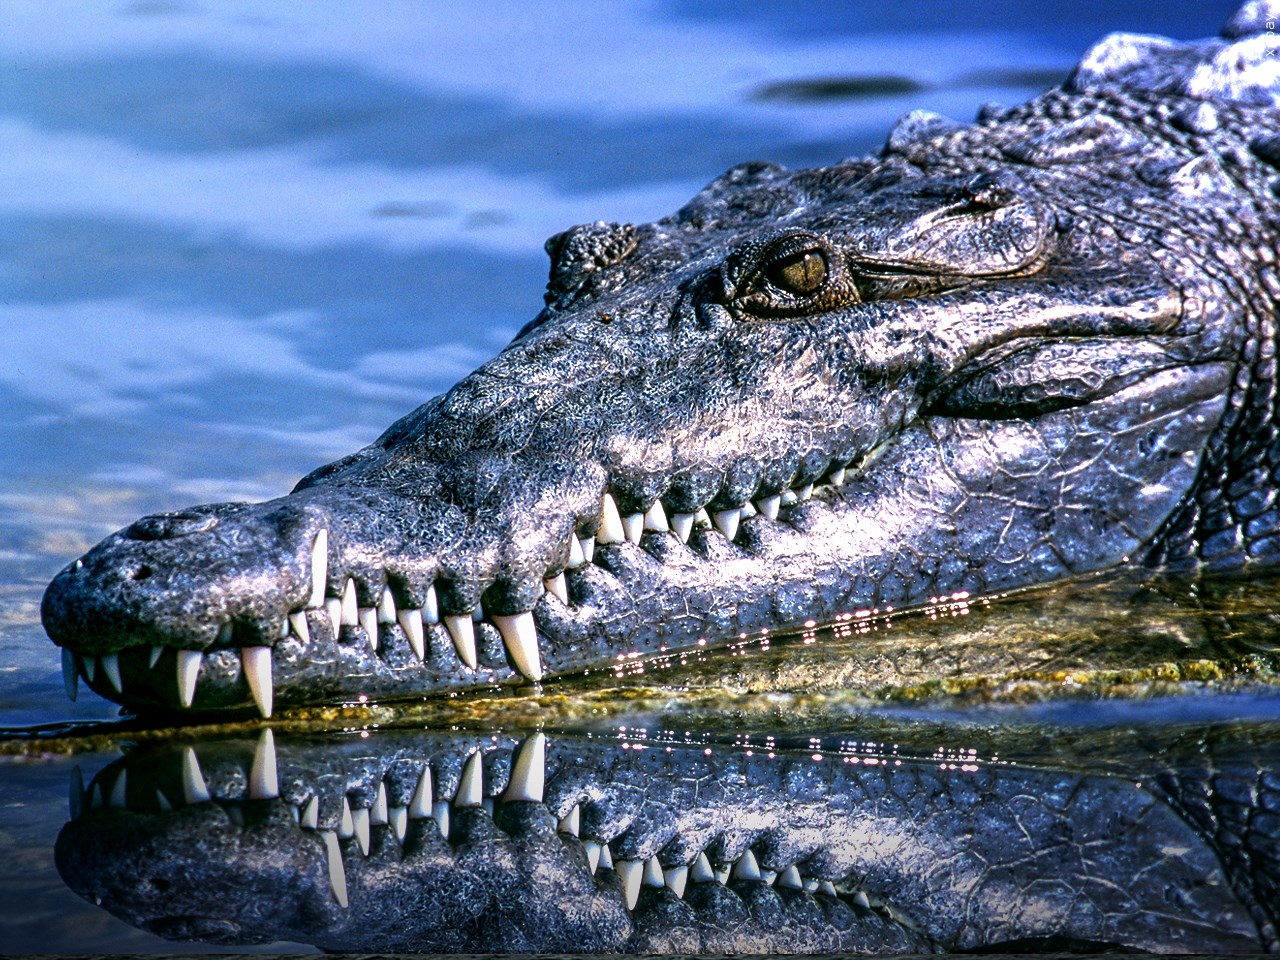 Alligator hunting season may soon be coming to Mississippi